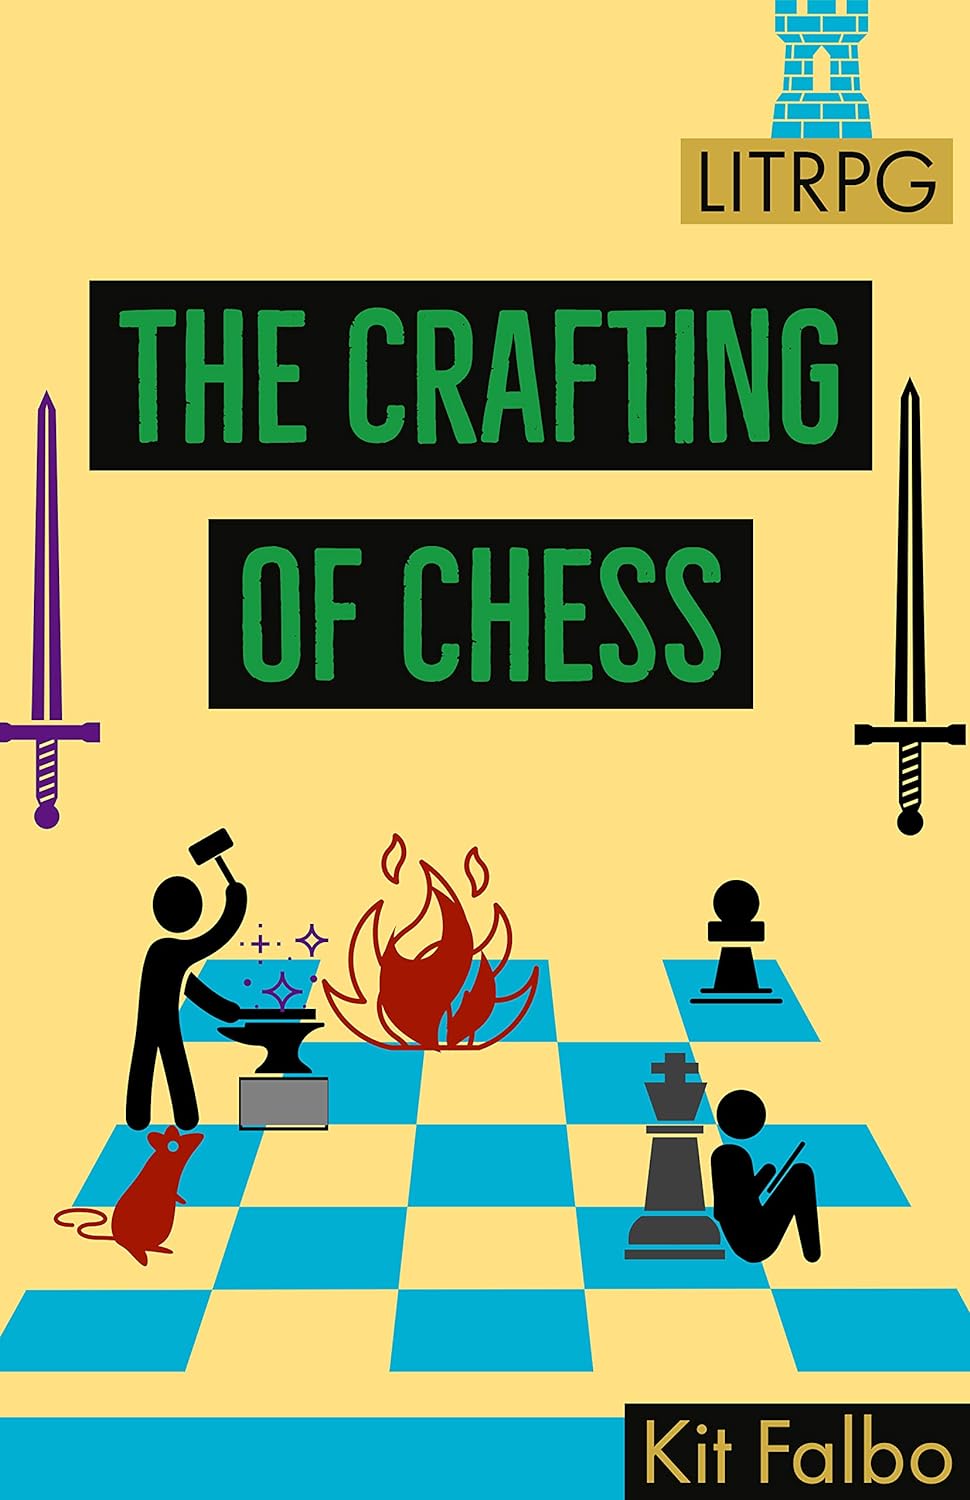 The Crafting of Chess: A LitRPG adventure (Fair Quest Book 1)